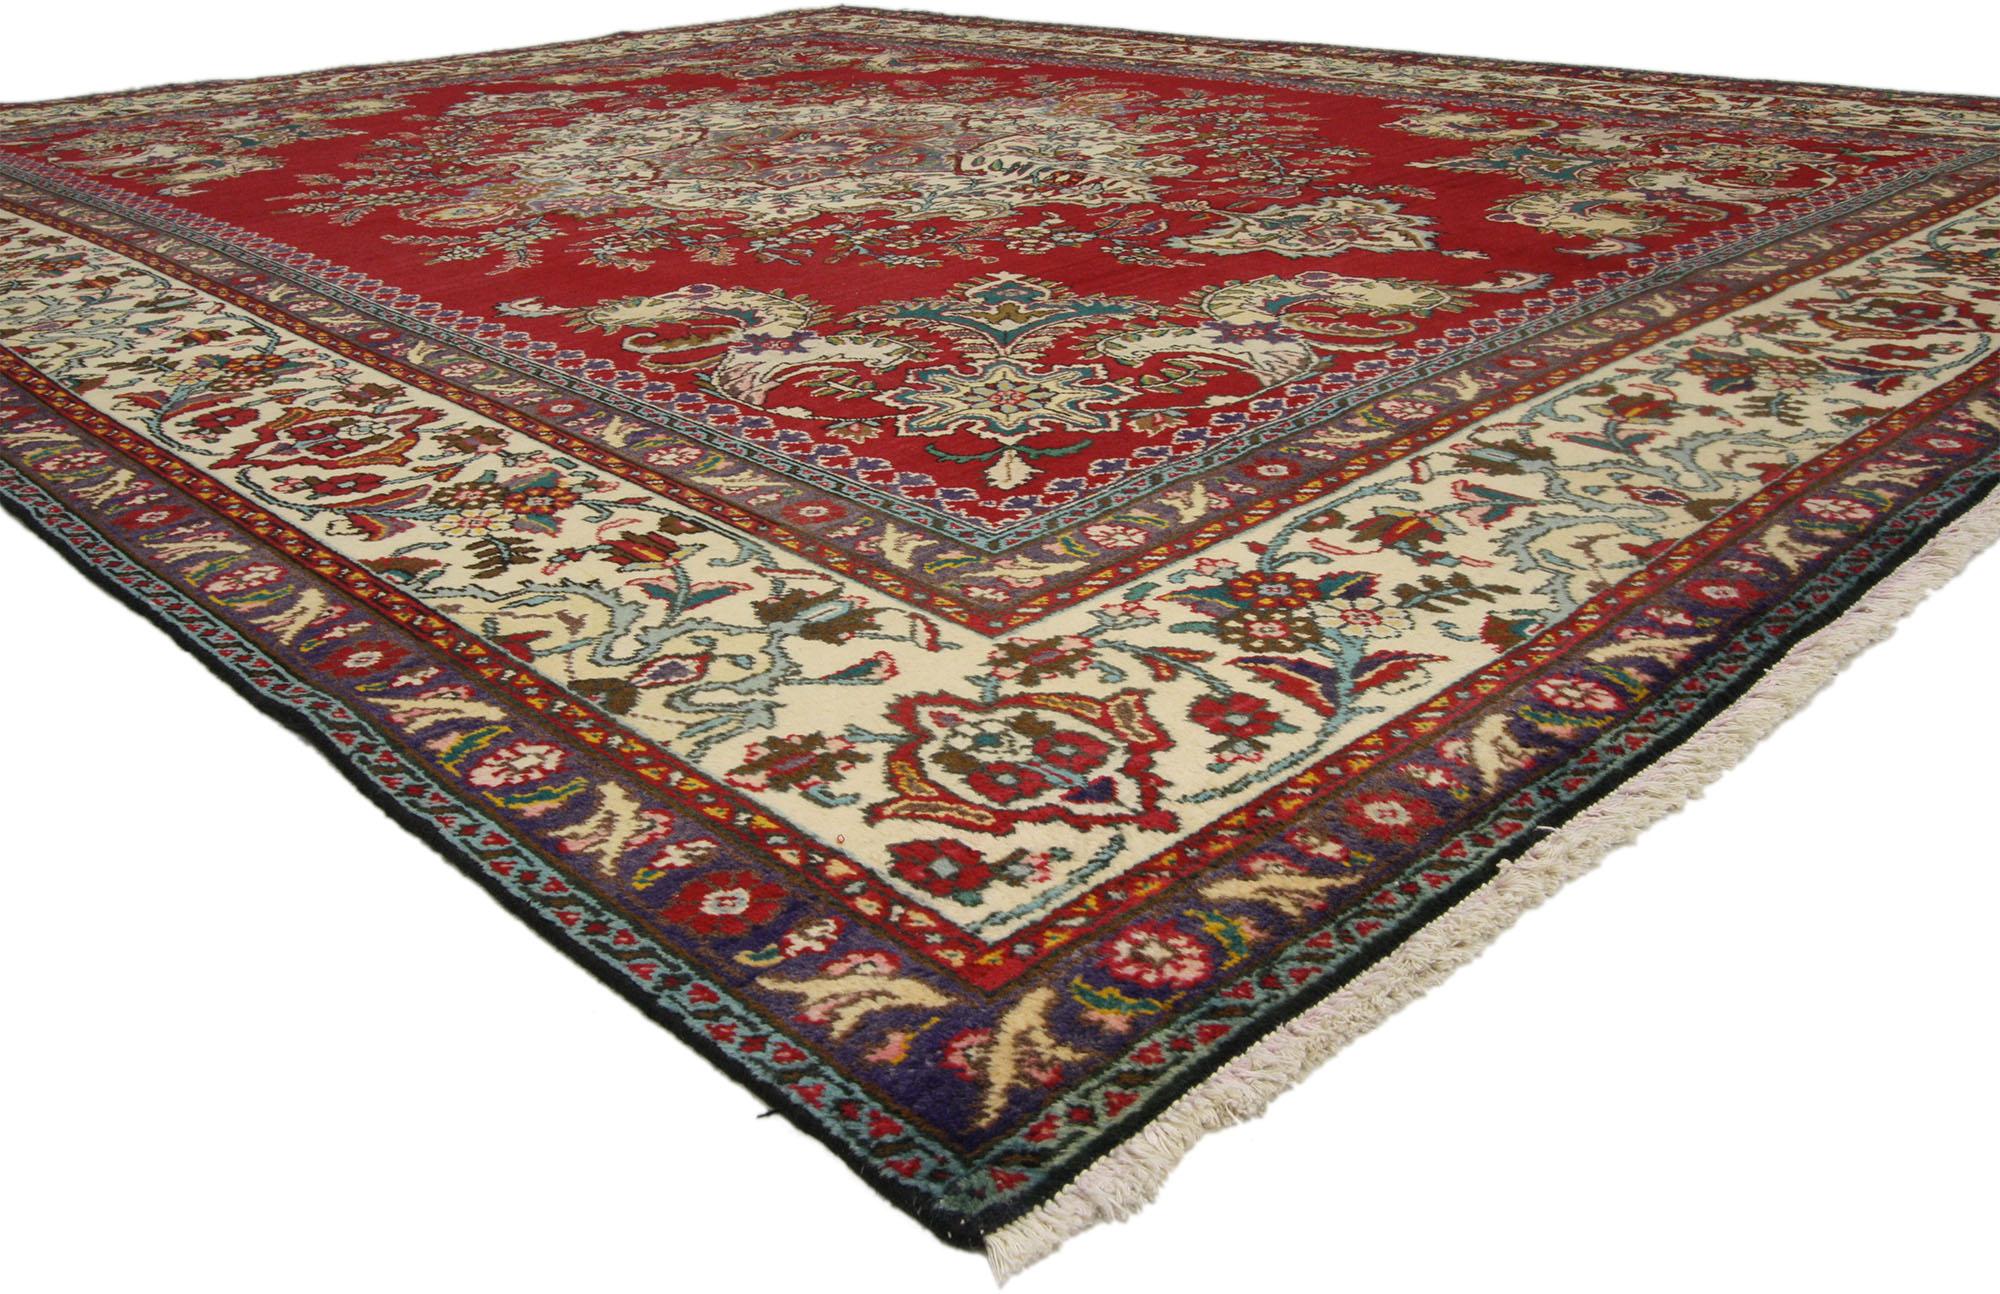 75766 Vintage Persian Tabriz Area Rug with Traditional Colonial and Federal Style. From casual elegance to fresh and formal, relish the refinement in this hand-knotted wool vintage Persian Tabriz area rug. Its bold colors evoke an air of warmth and